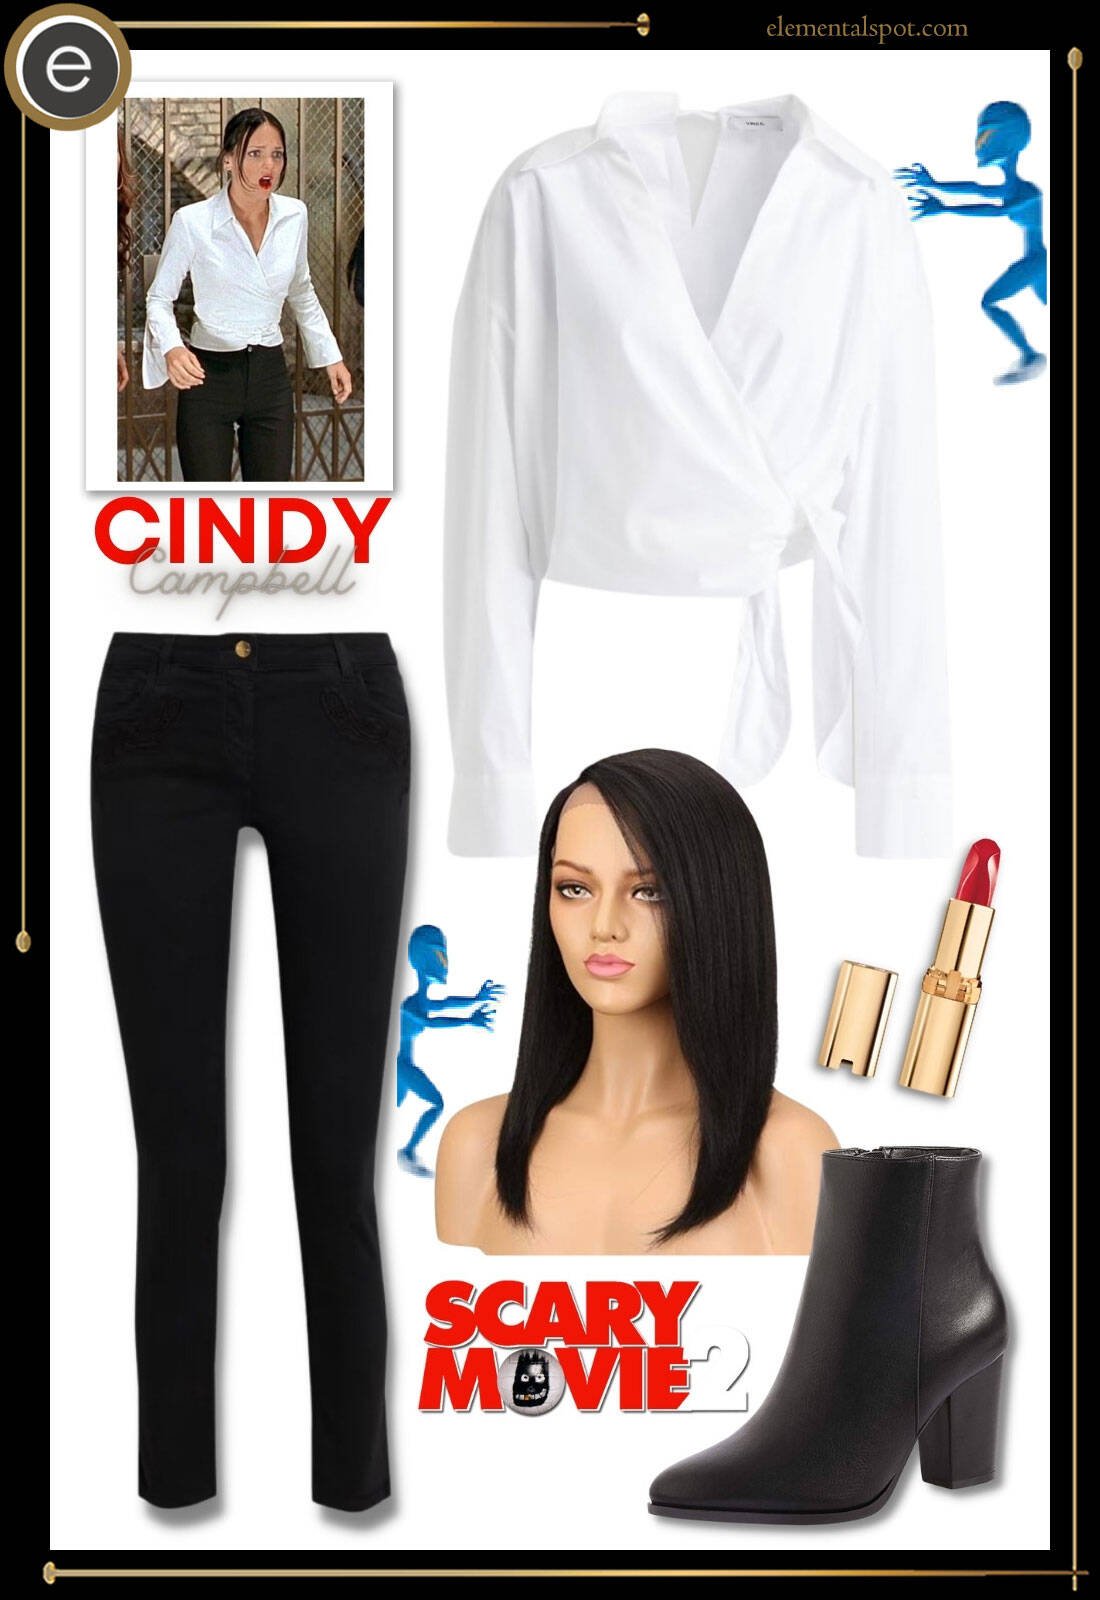 Costume or Outfit-Cindy Campell-Scary Movie 2